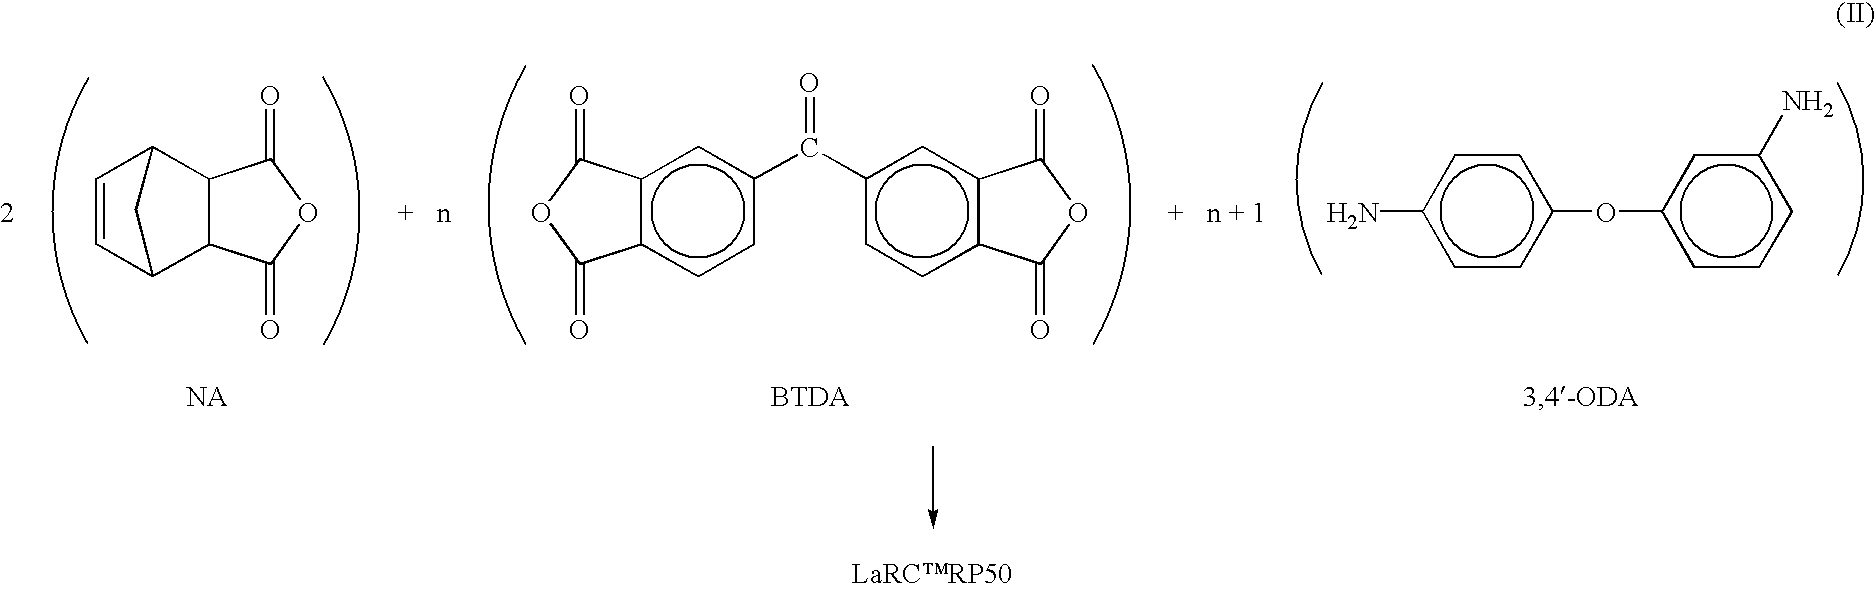 Heat, moisture, and chemical resistant polyimide compositions and methods for making and using them